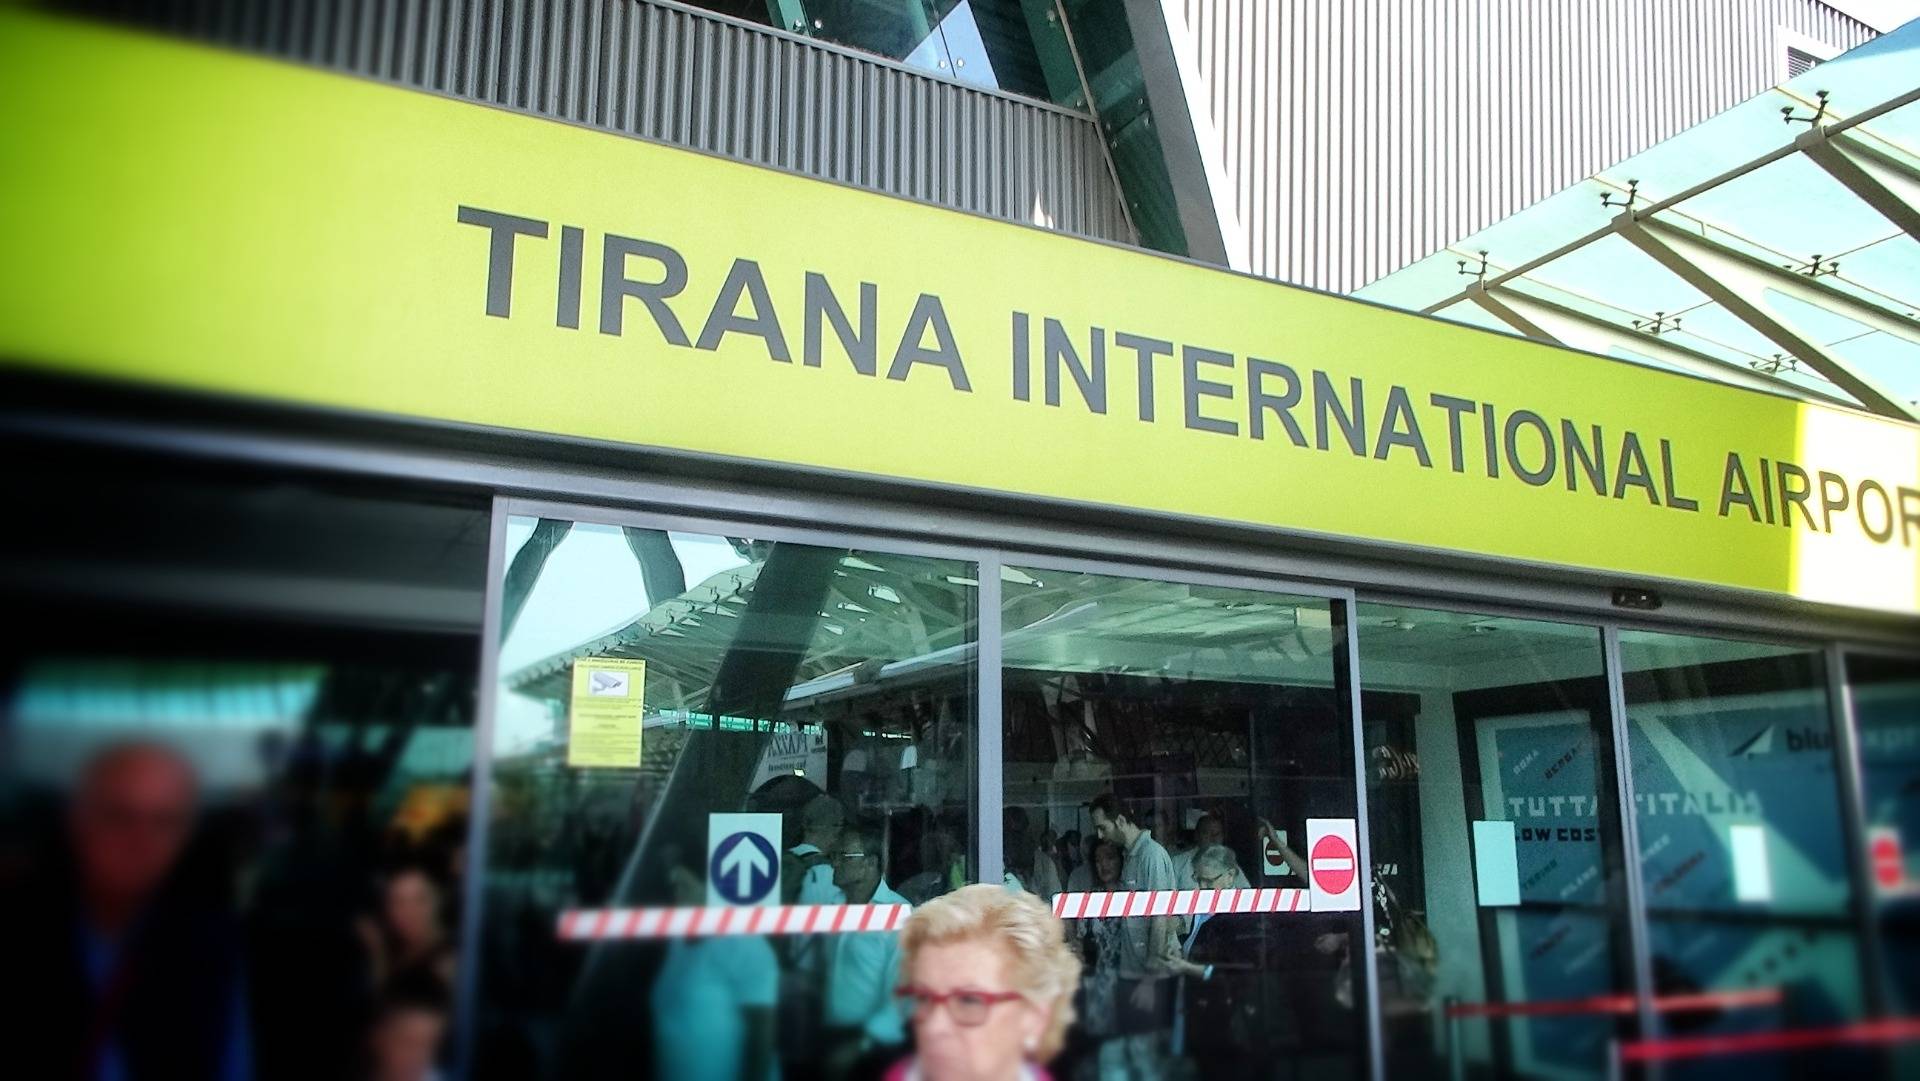 The Tirana Airport is named after Mother Theresa, the most famous person born in the small country